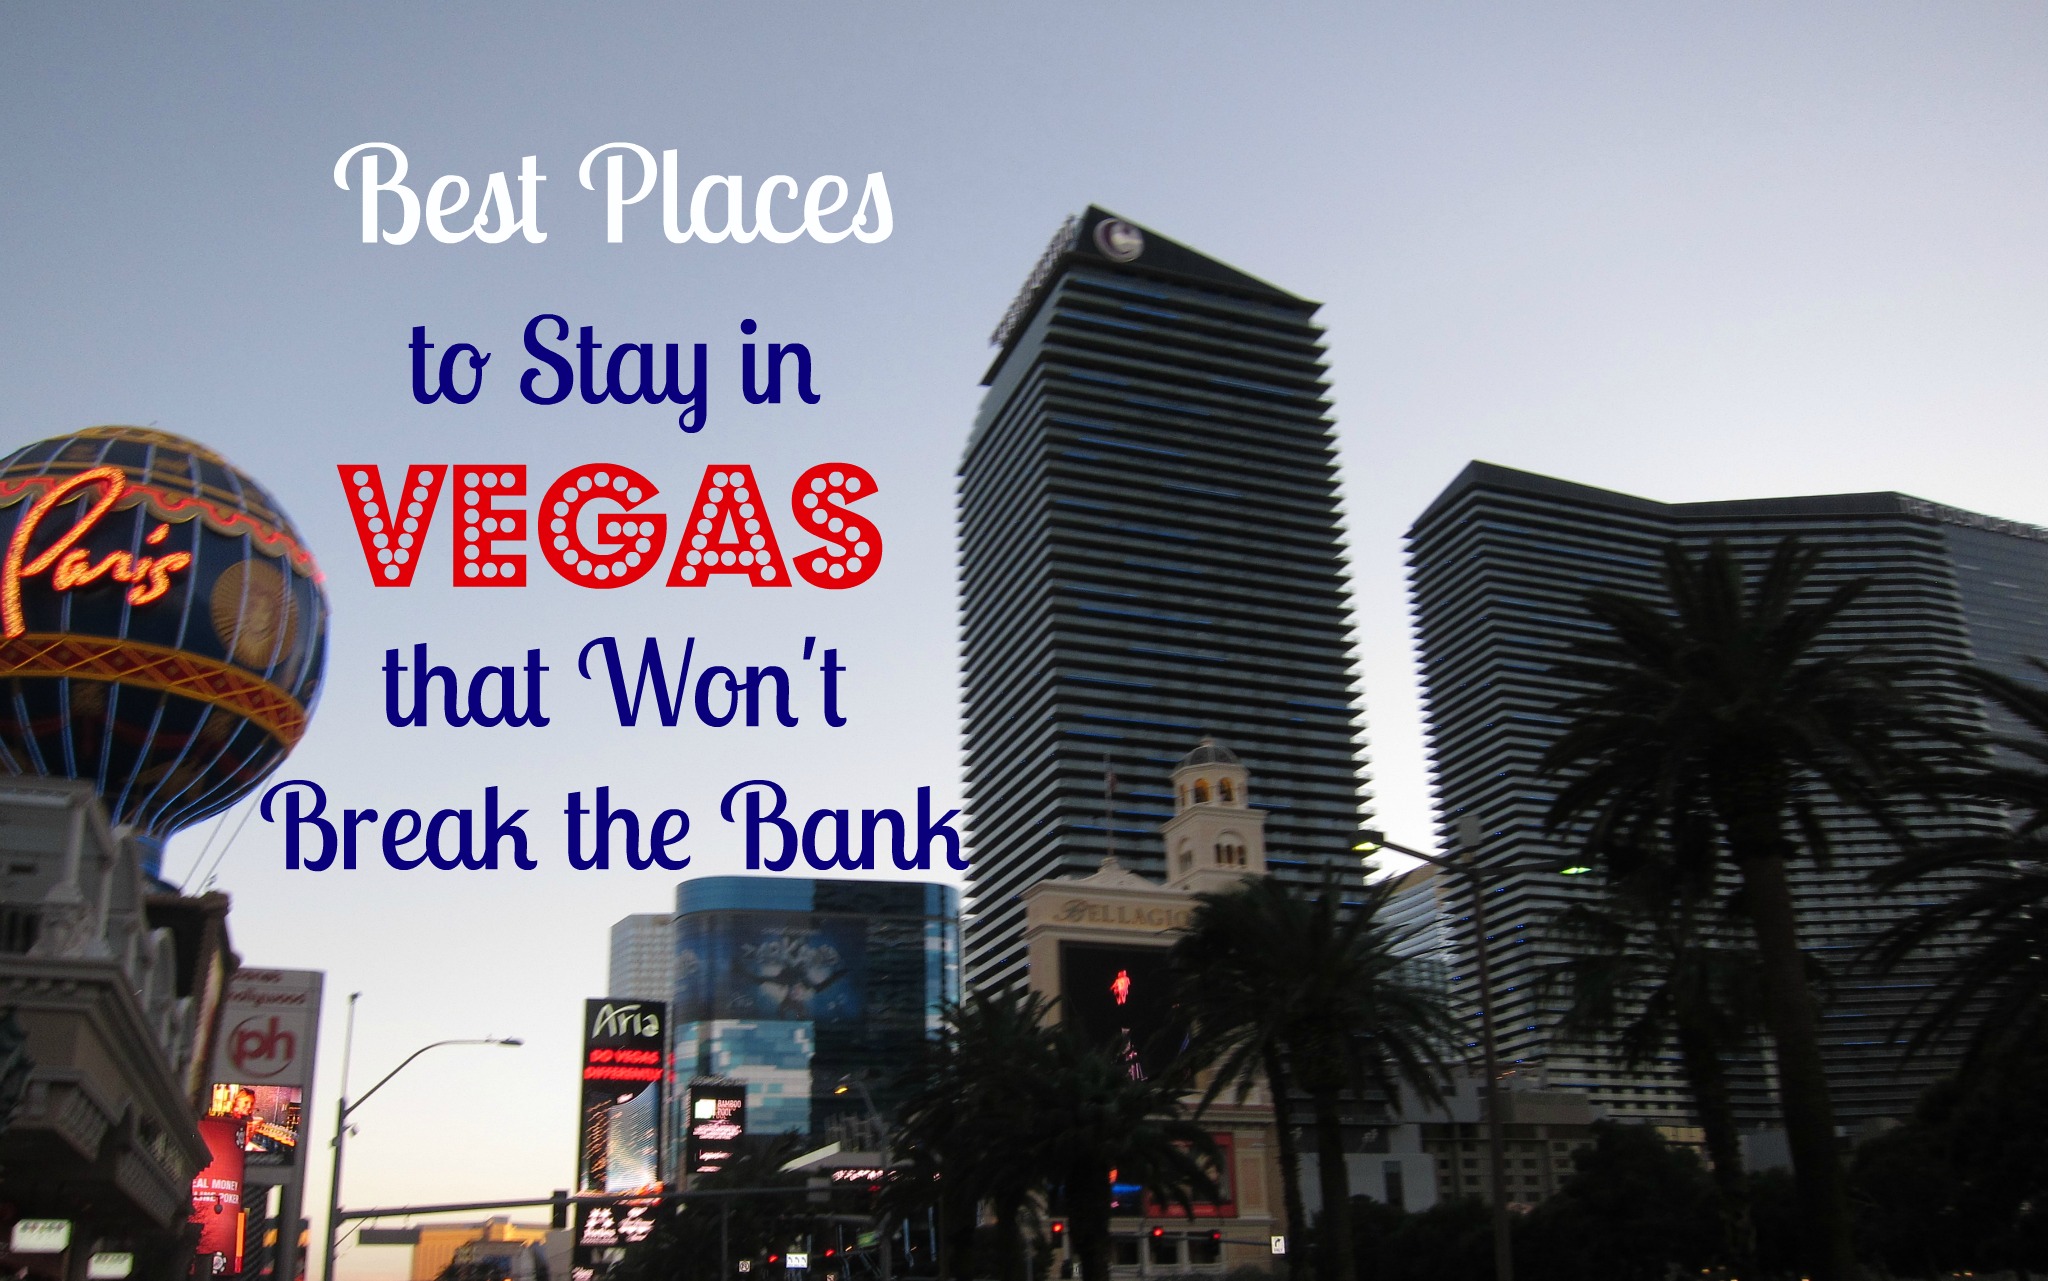 Best Places to Stay in Las Vegas that Won't Break the Bank